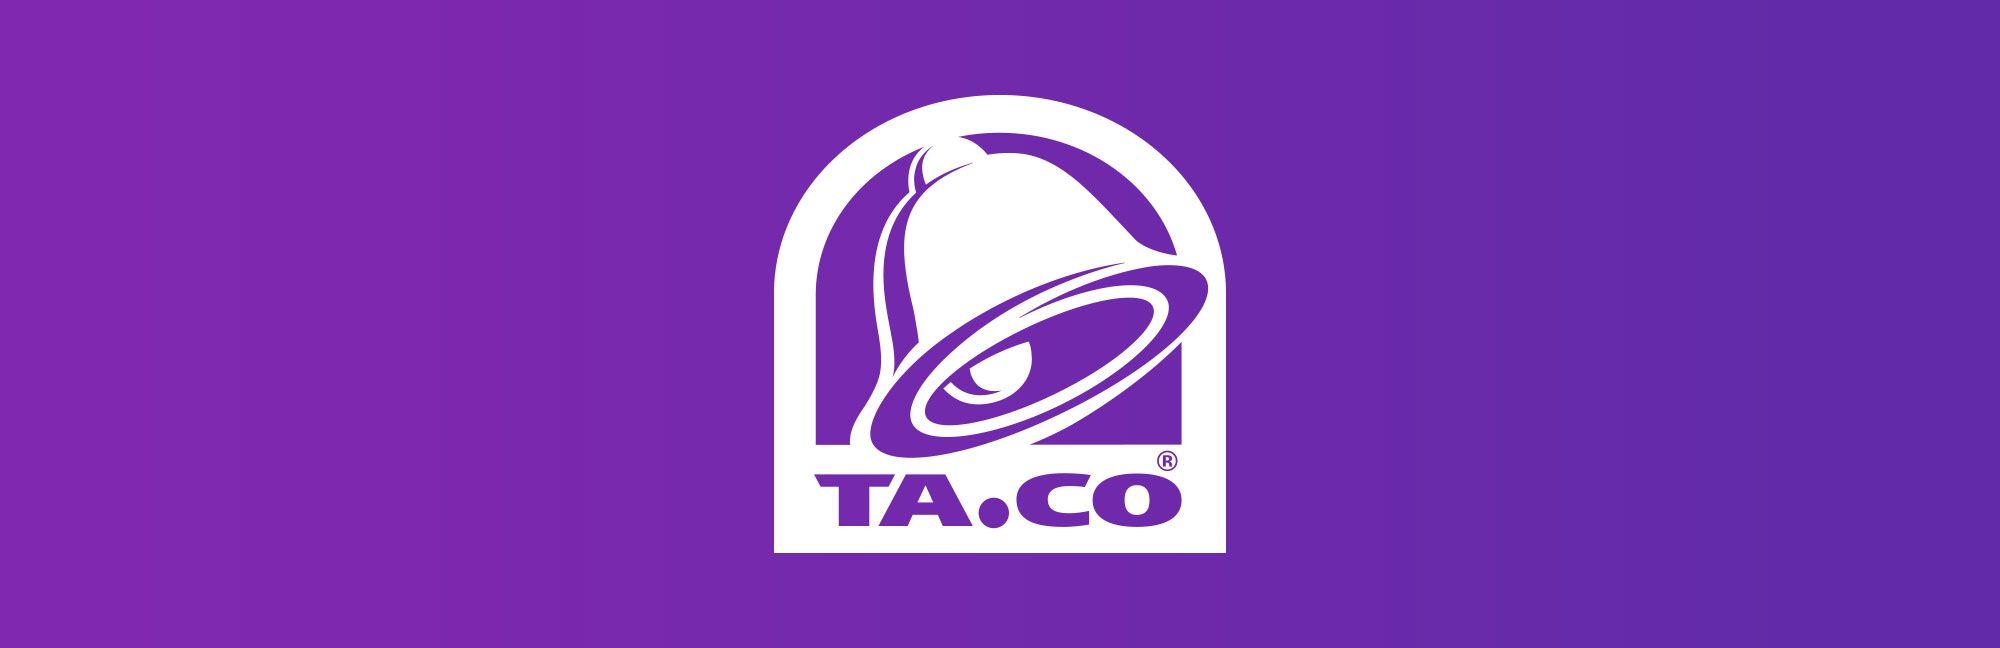 New Taco Bell Logo - Able Parris - taco bell site redesign